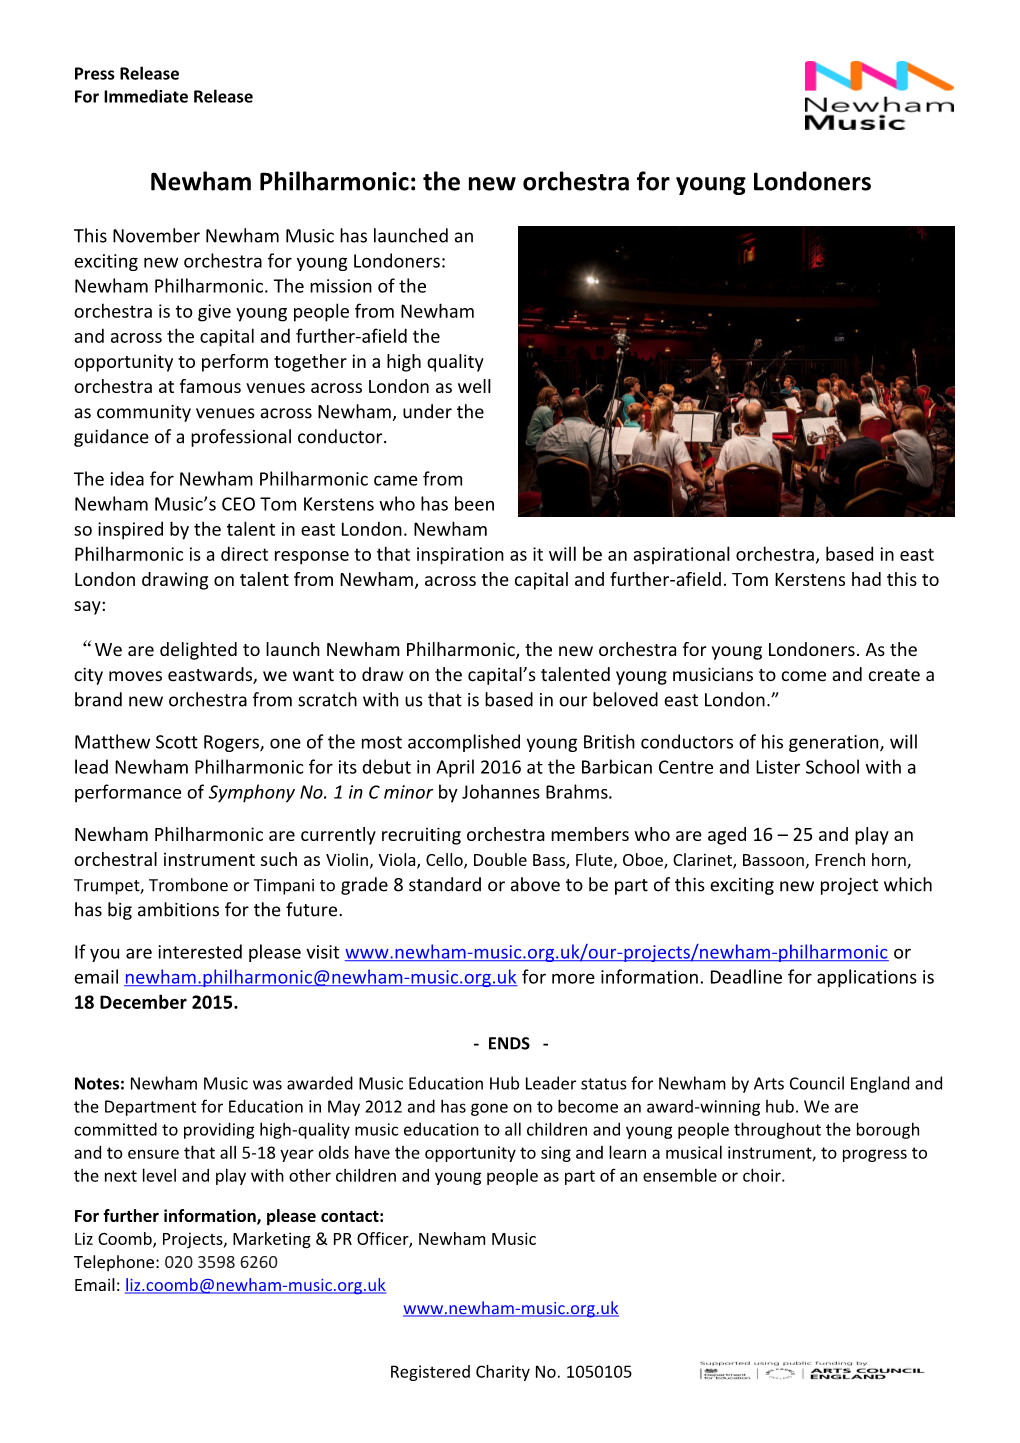 Newham Philharmonic: the New Orchestra for Young Londoners